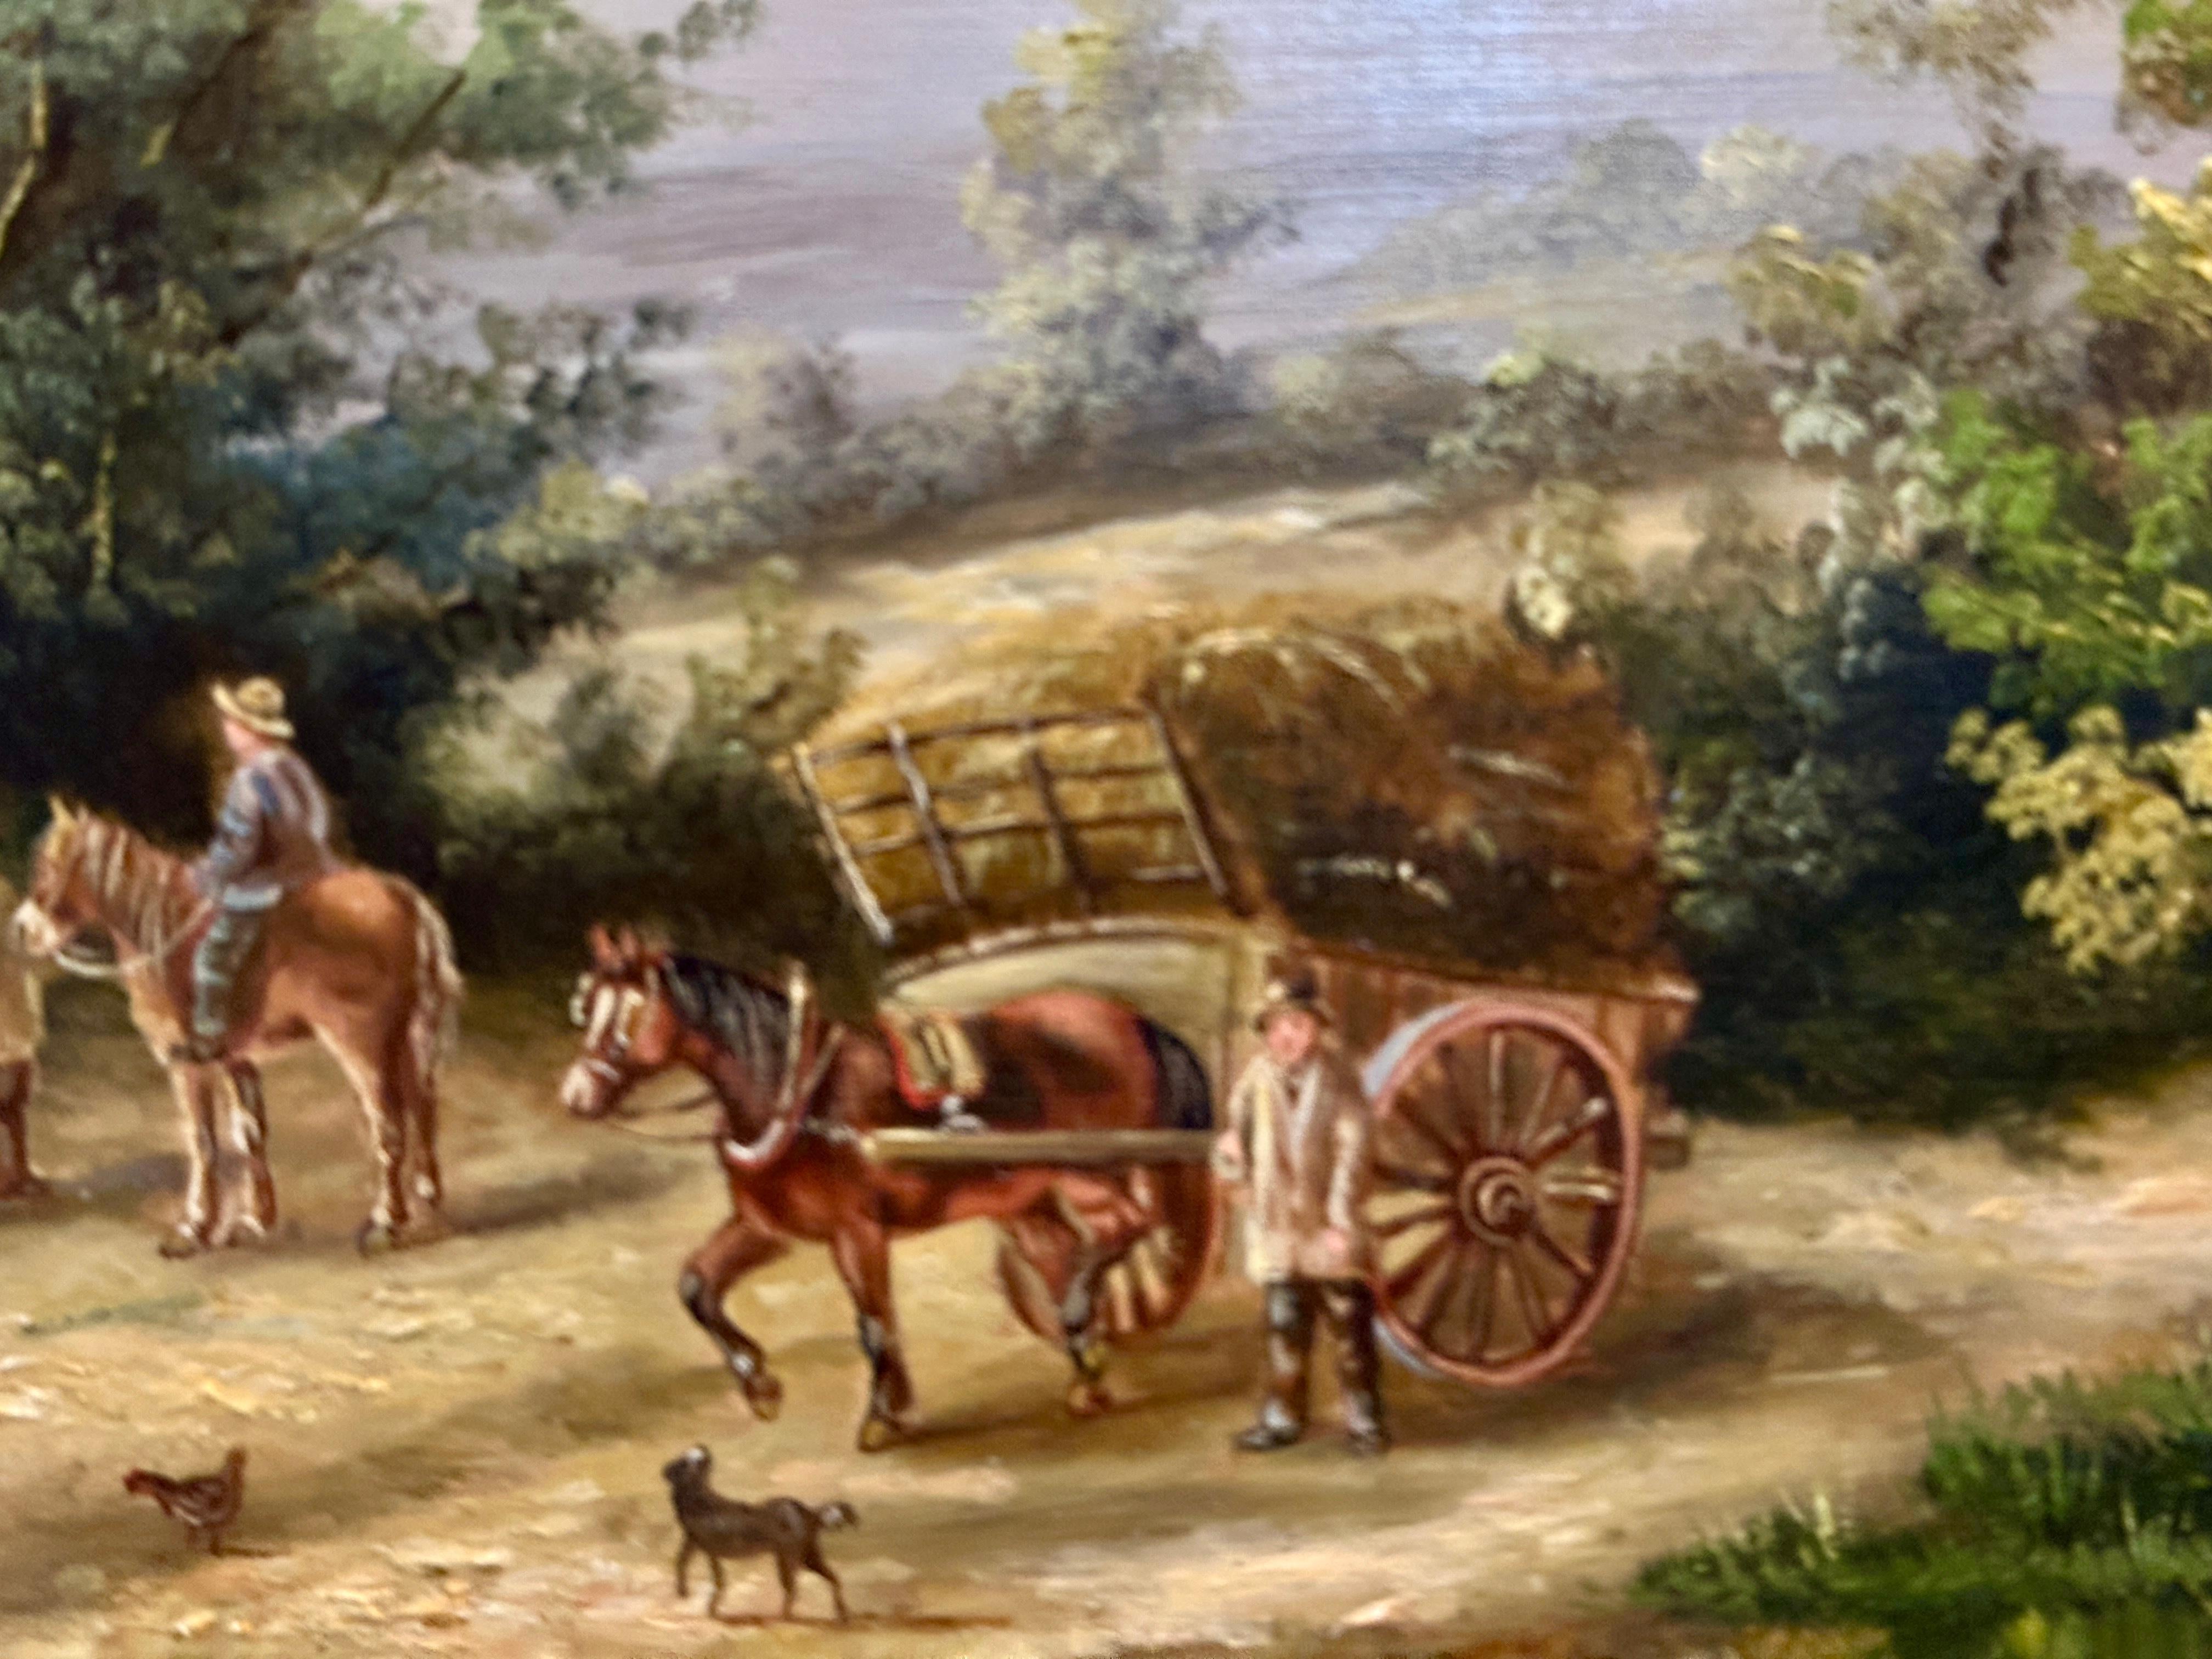 Georgine Lara

English Village landscape

A painting by Georgina Lara depicting a 19th-century English village scene offers a charming and evocative portrayal of a bygone era, capturing the essence of rural life during that time. Lara's artistic